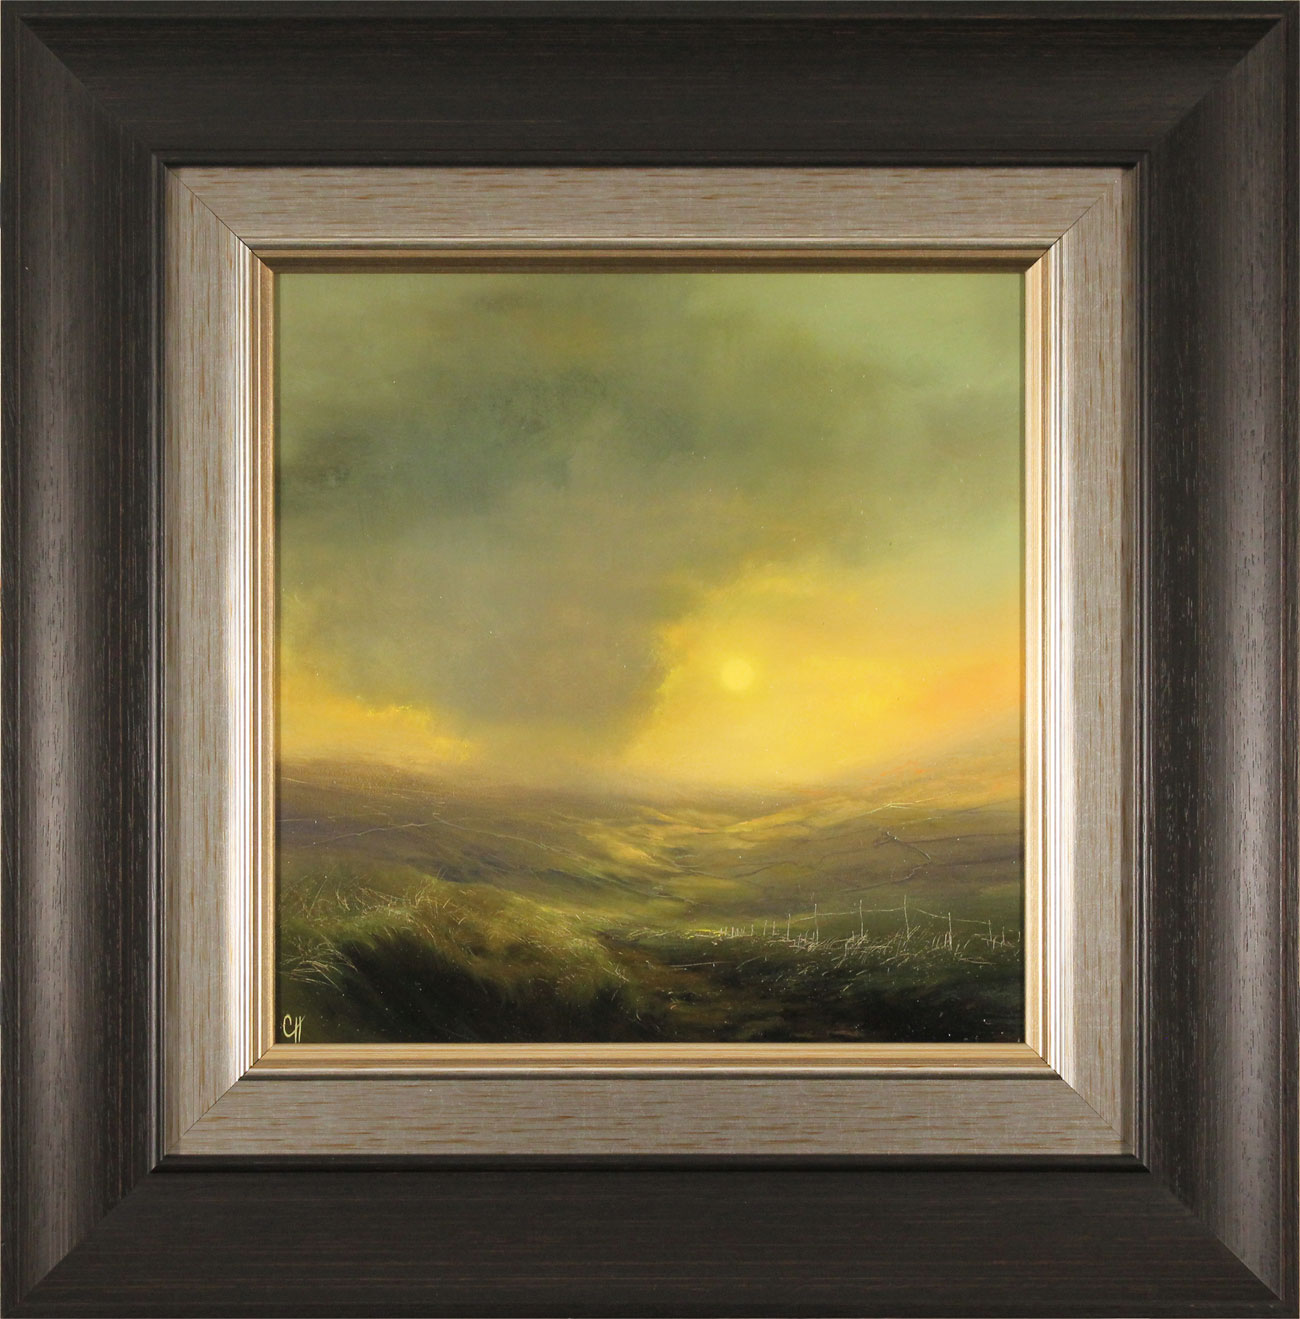 Clare Haley, Original oil painting on panel, Warmth in the Air. Click to enlarge